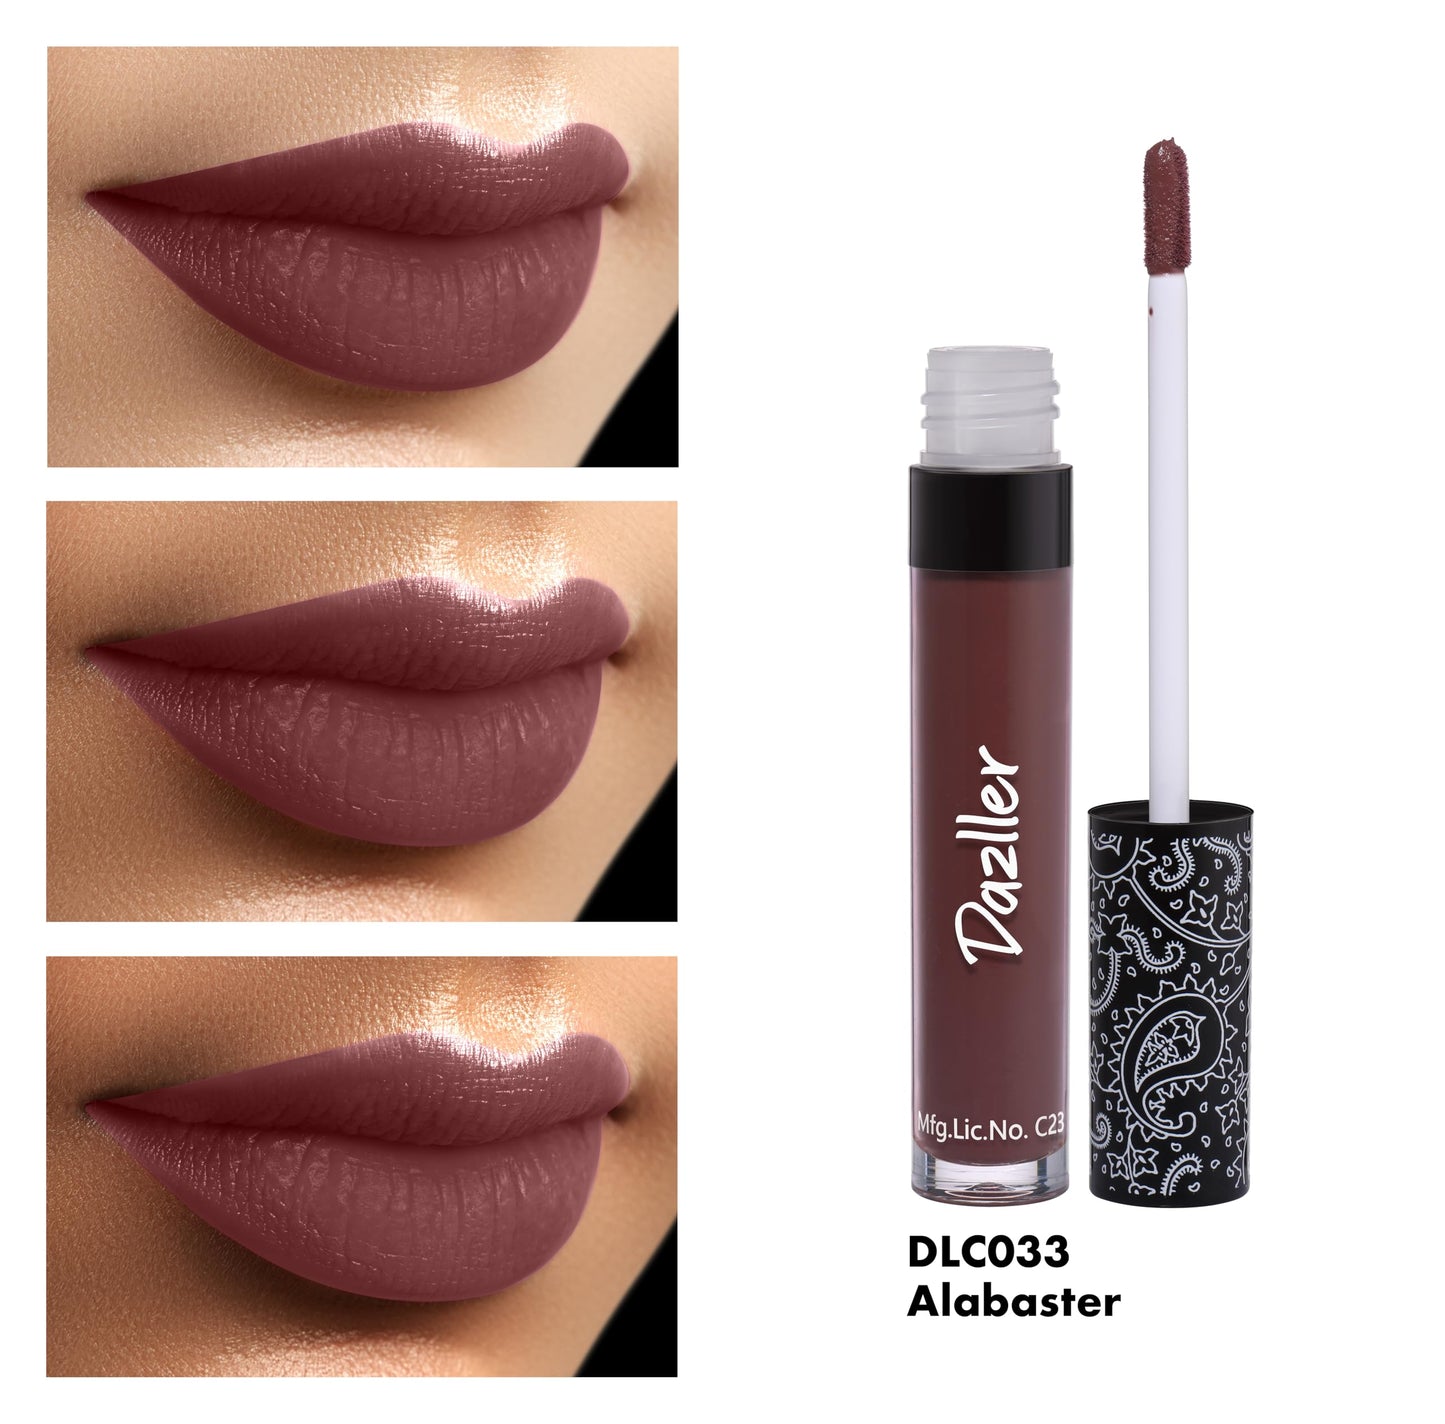 Dazller All Day Lipcolour,5g, DLC033-Alabaster, Ultra intense matte,Smudge-proof, Non-transfer,Lightweight,up to 8-hr Stay